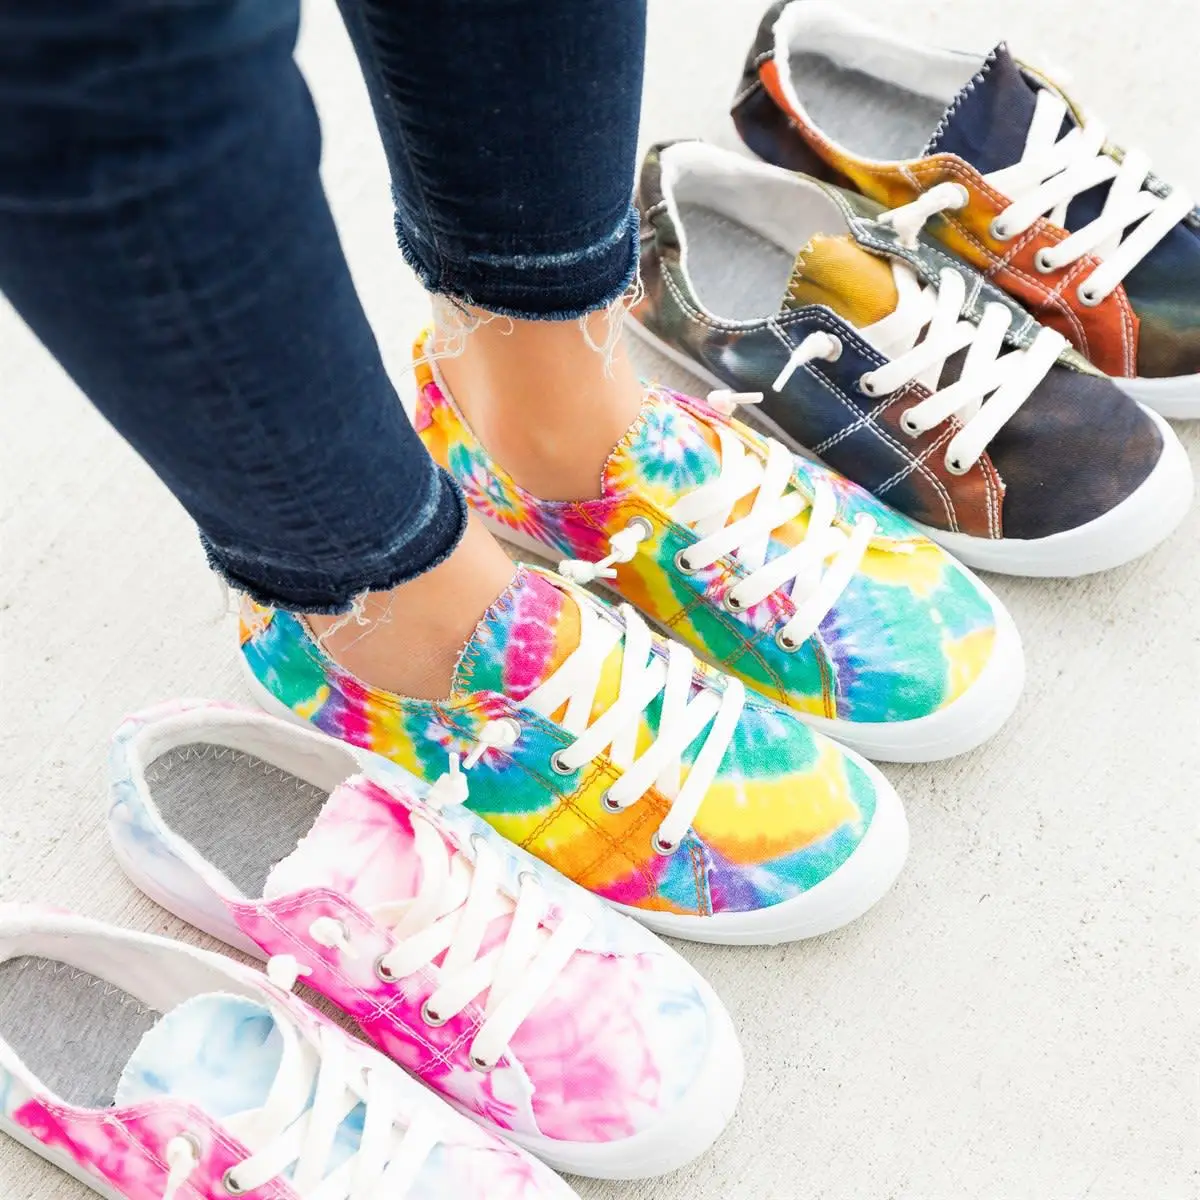 Ca-002 2020 Latest Colorful Tie Dye Floral Print Canvas Shoes For Women  Casual Lace Up Flat Walking Shoes Daily Outwear Shoes - Buy Women Shoes,Casual  Shoes,Canvas Shoes Product on 